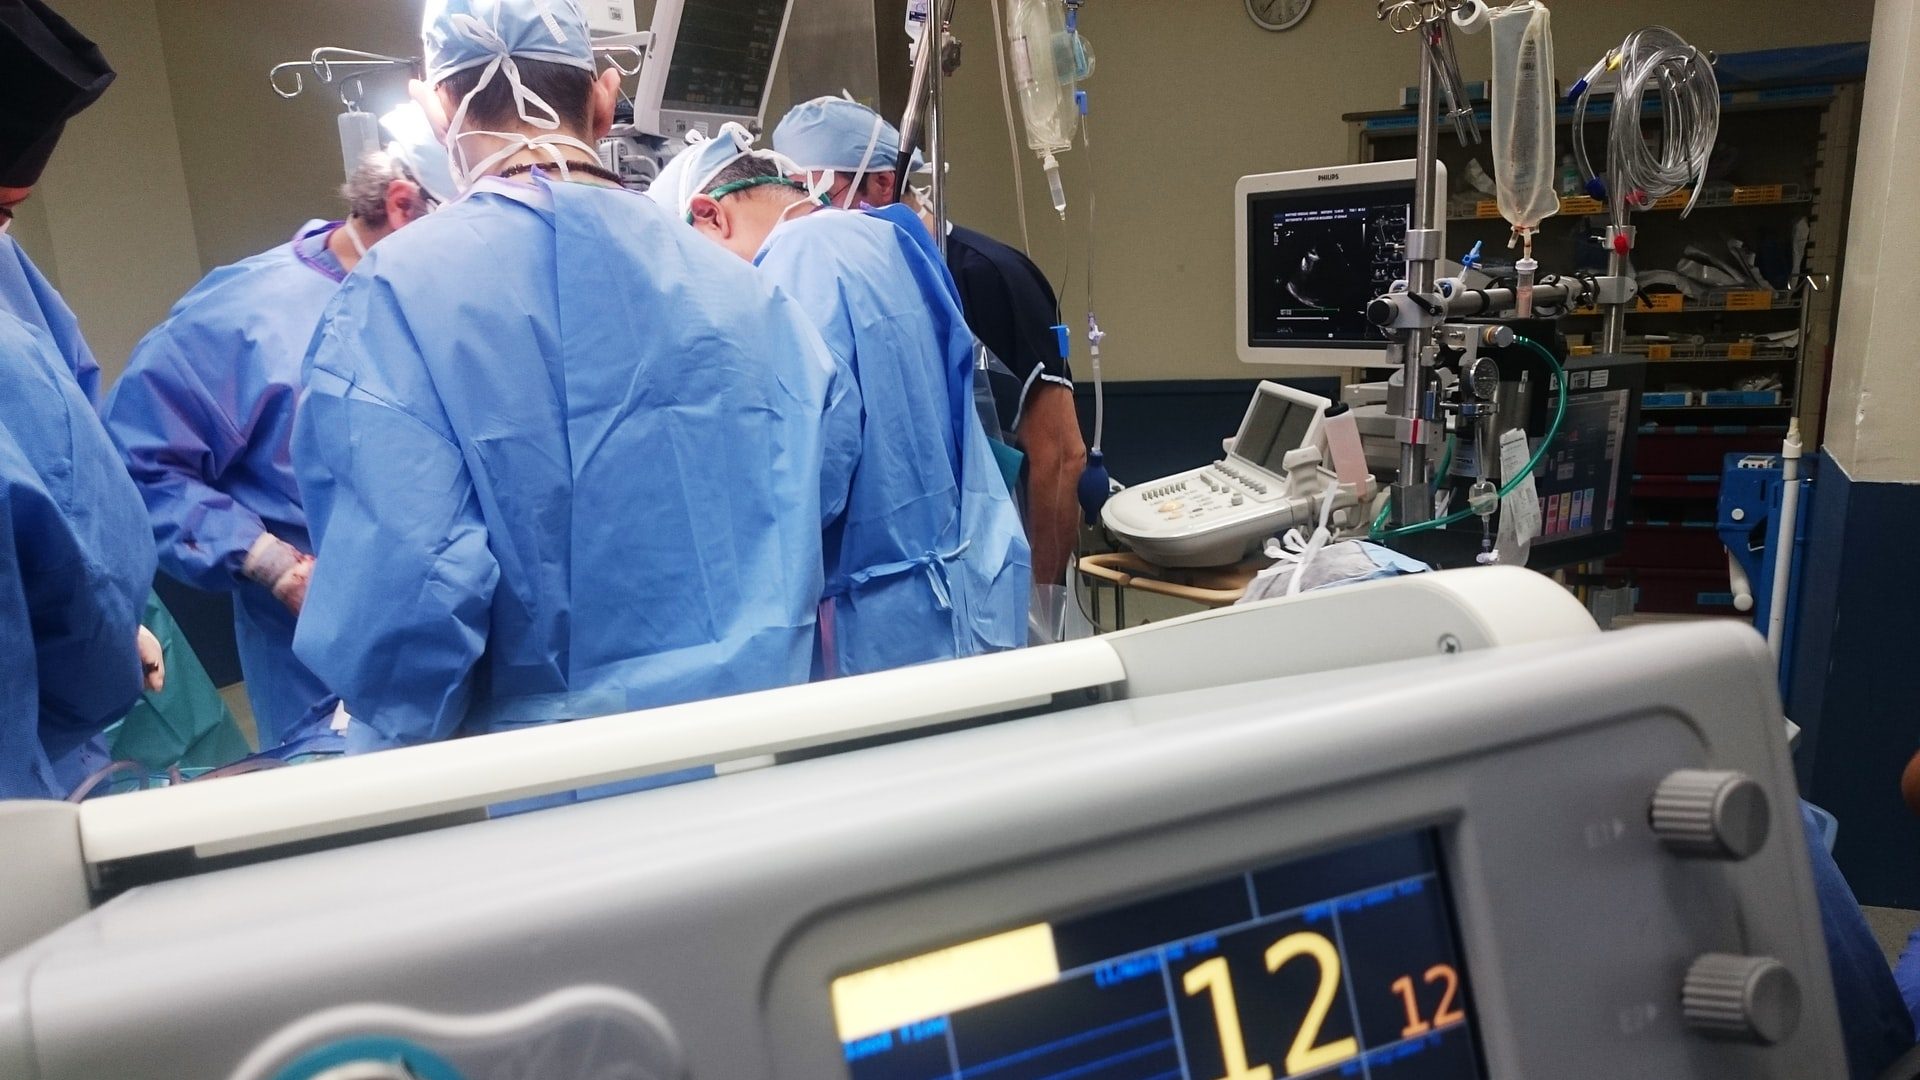 Healthcare providers in an operating room